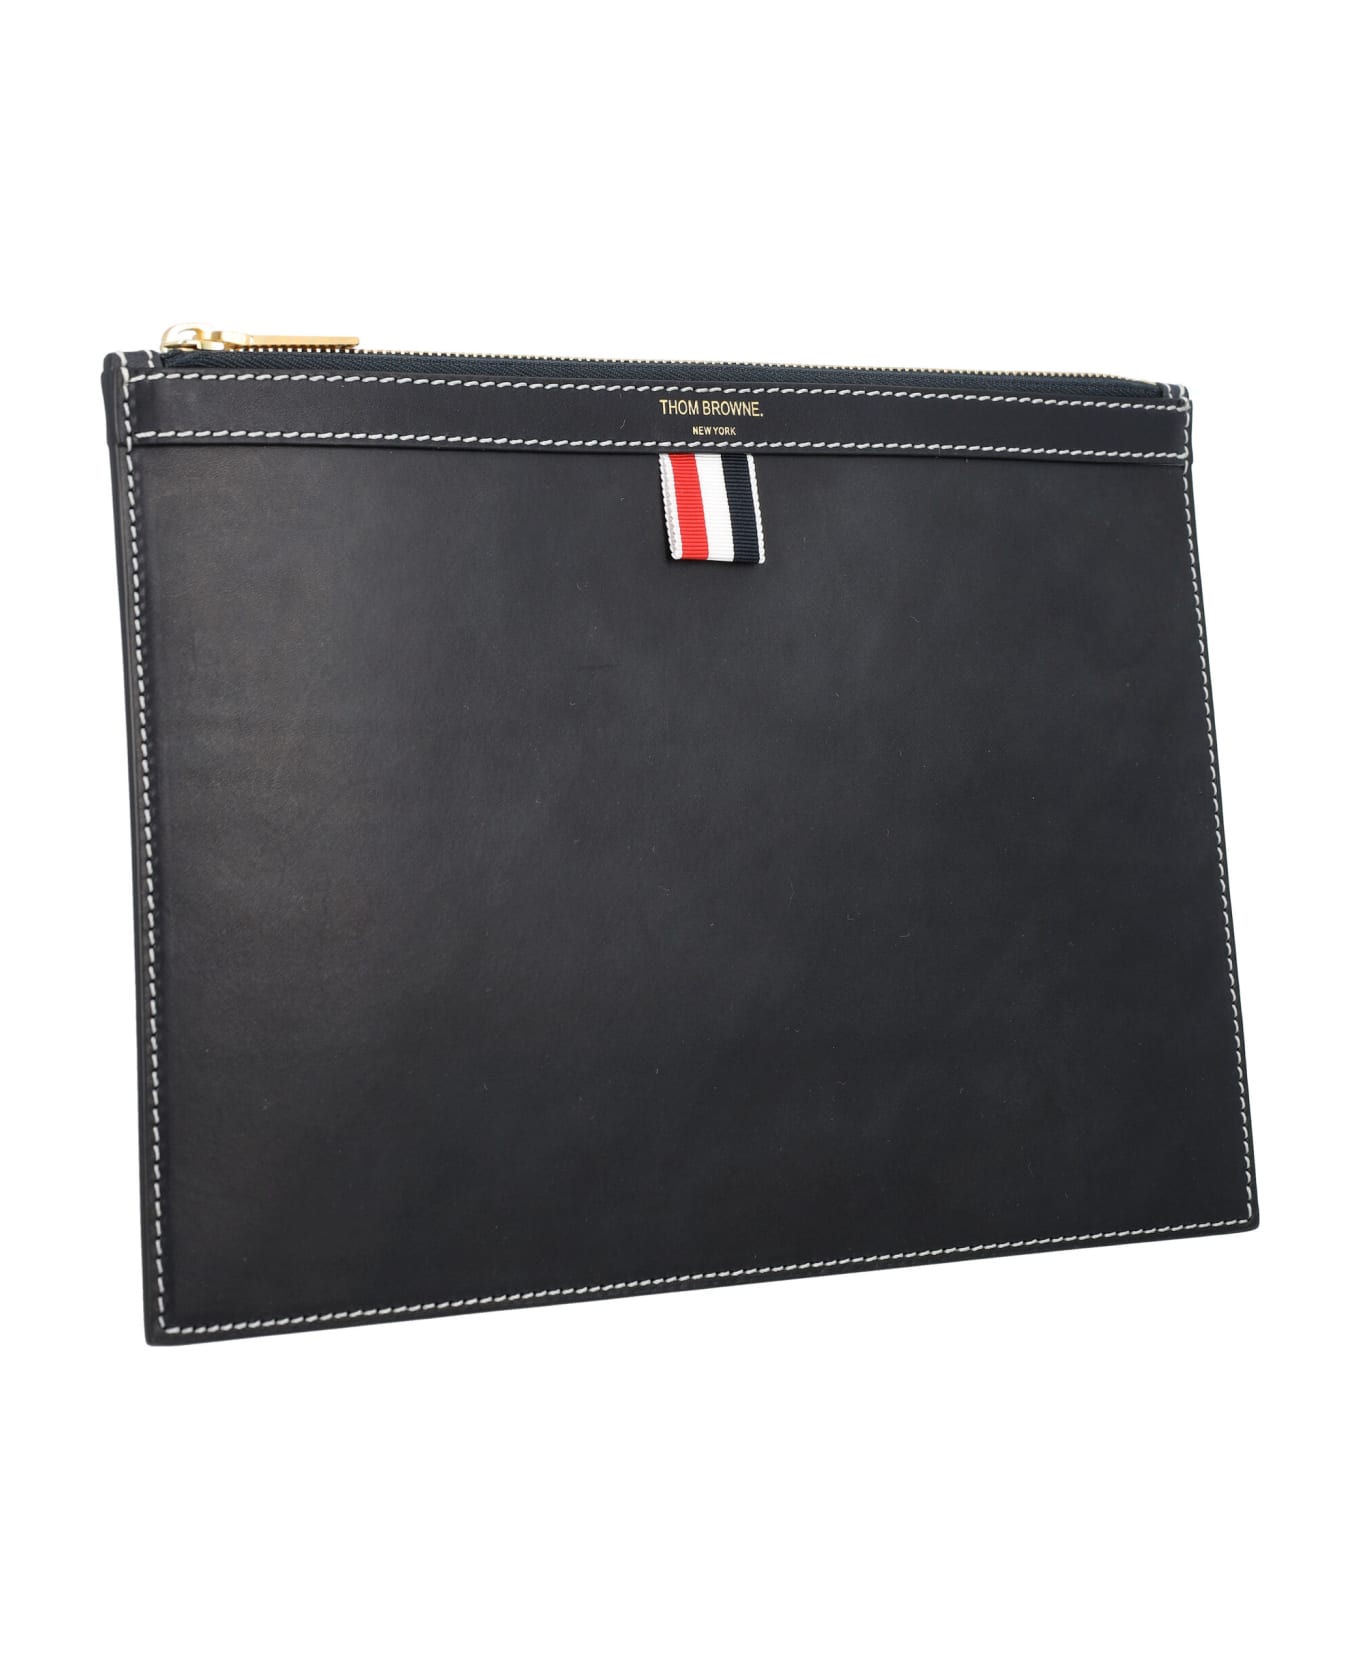 Thom Browne Document Holder Small - NAVY 財布